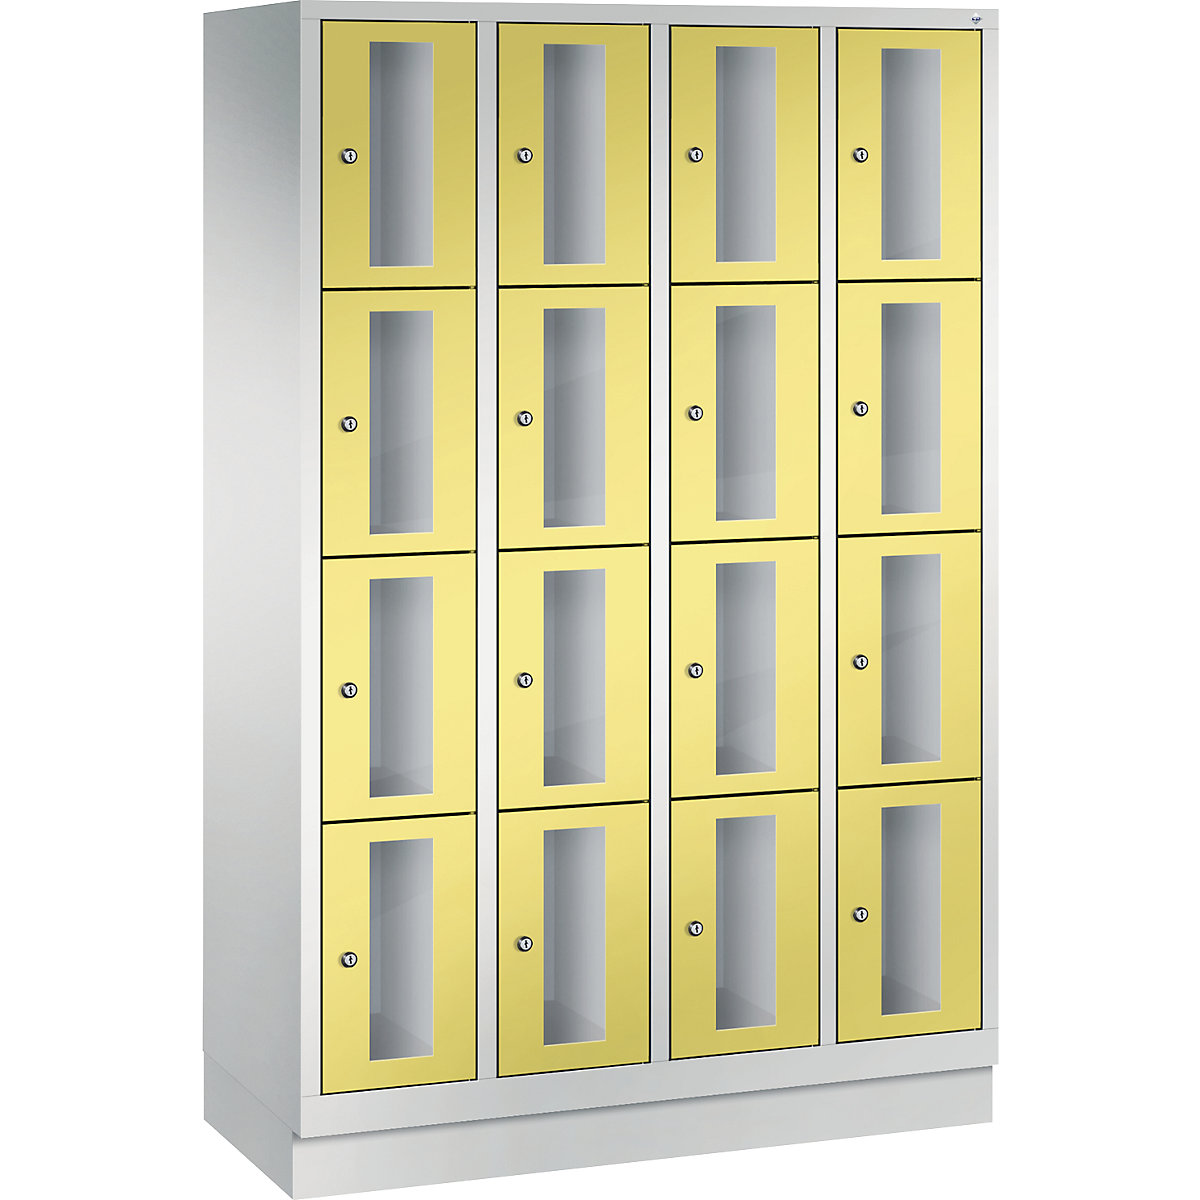 C+P – CLASSIC locker unit, compartment height 375 mm, with plinth, 16 compartments, width 1190 mm, sulphur yellow door